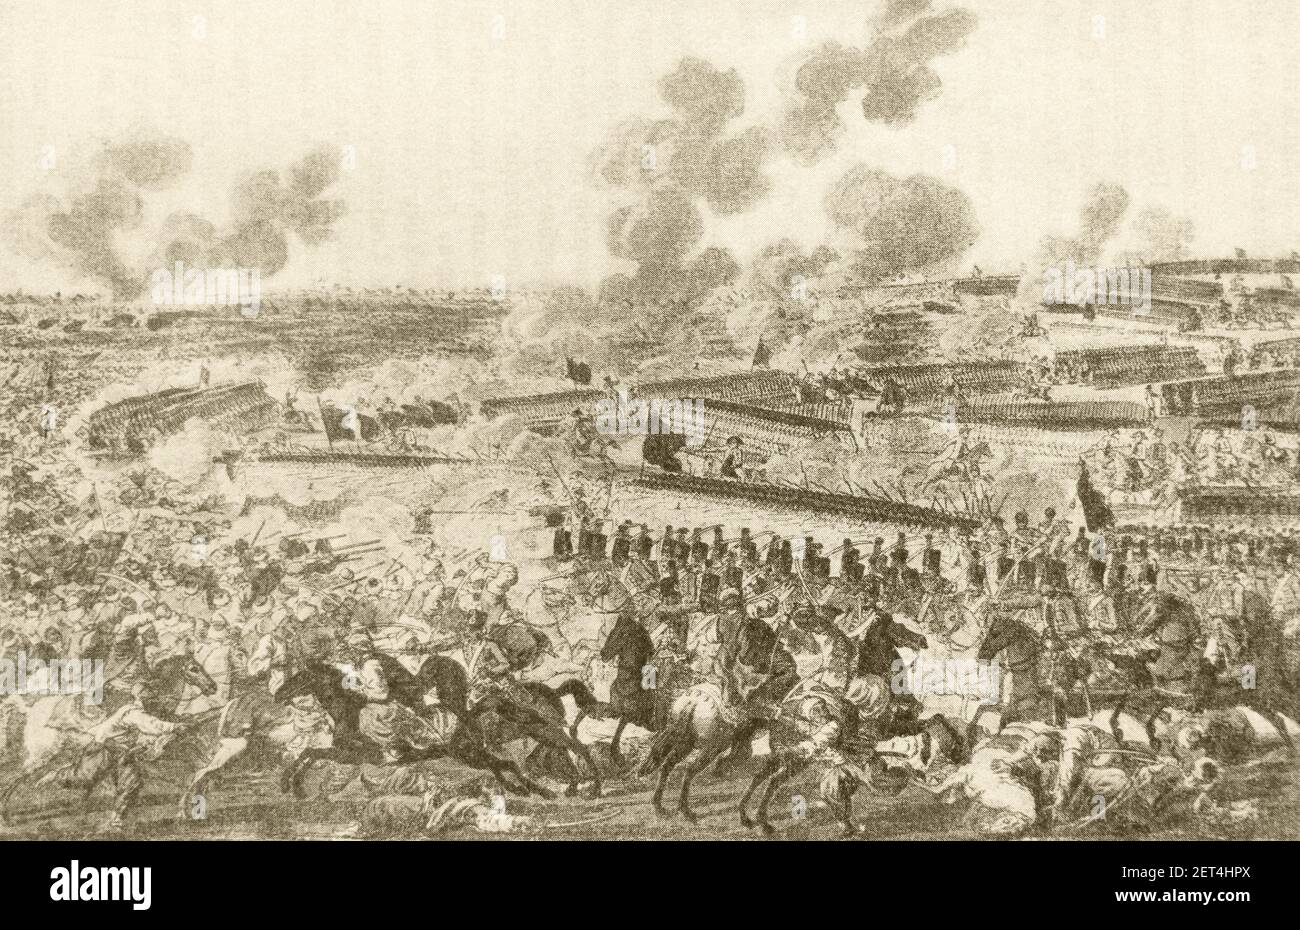 The Battle of Rymnik. The engraving of the 18th century. The Battle of Rymnik (Turkish: Boze Savaşı) on September 22, 1789 took place in Wallachia, near Râmnicu Sărat (now in Romania), during the Russo-Turkish War of 1787-1792. The Russian general Alexander Suvorov, acting together with the Habsburg general Prince Josias of Coburg, attacked the main Ottoman army under Grand Vizier Cenaze Hasan Pasha. The result was a crushing Russo-Austrian victory. Stock Photo